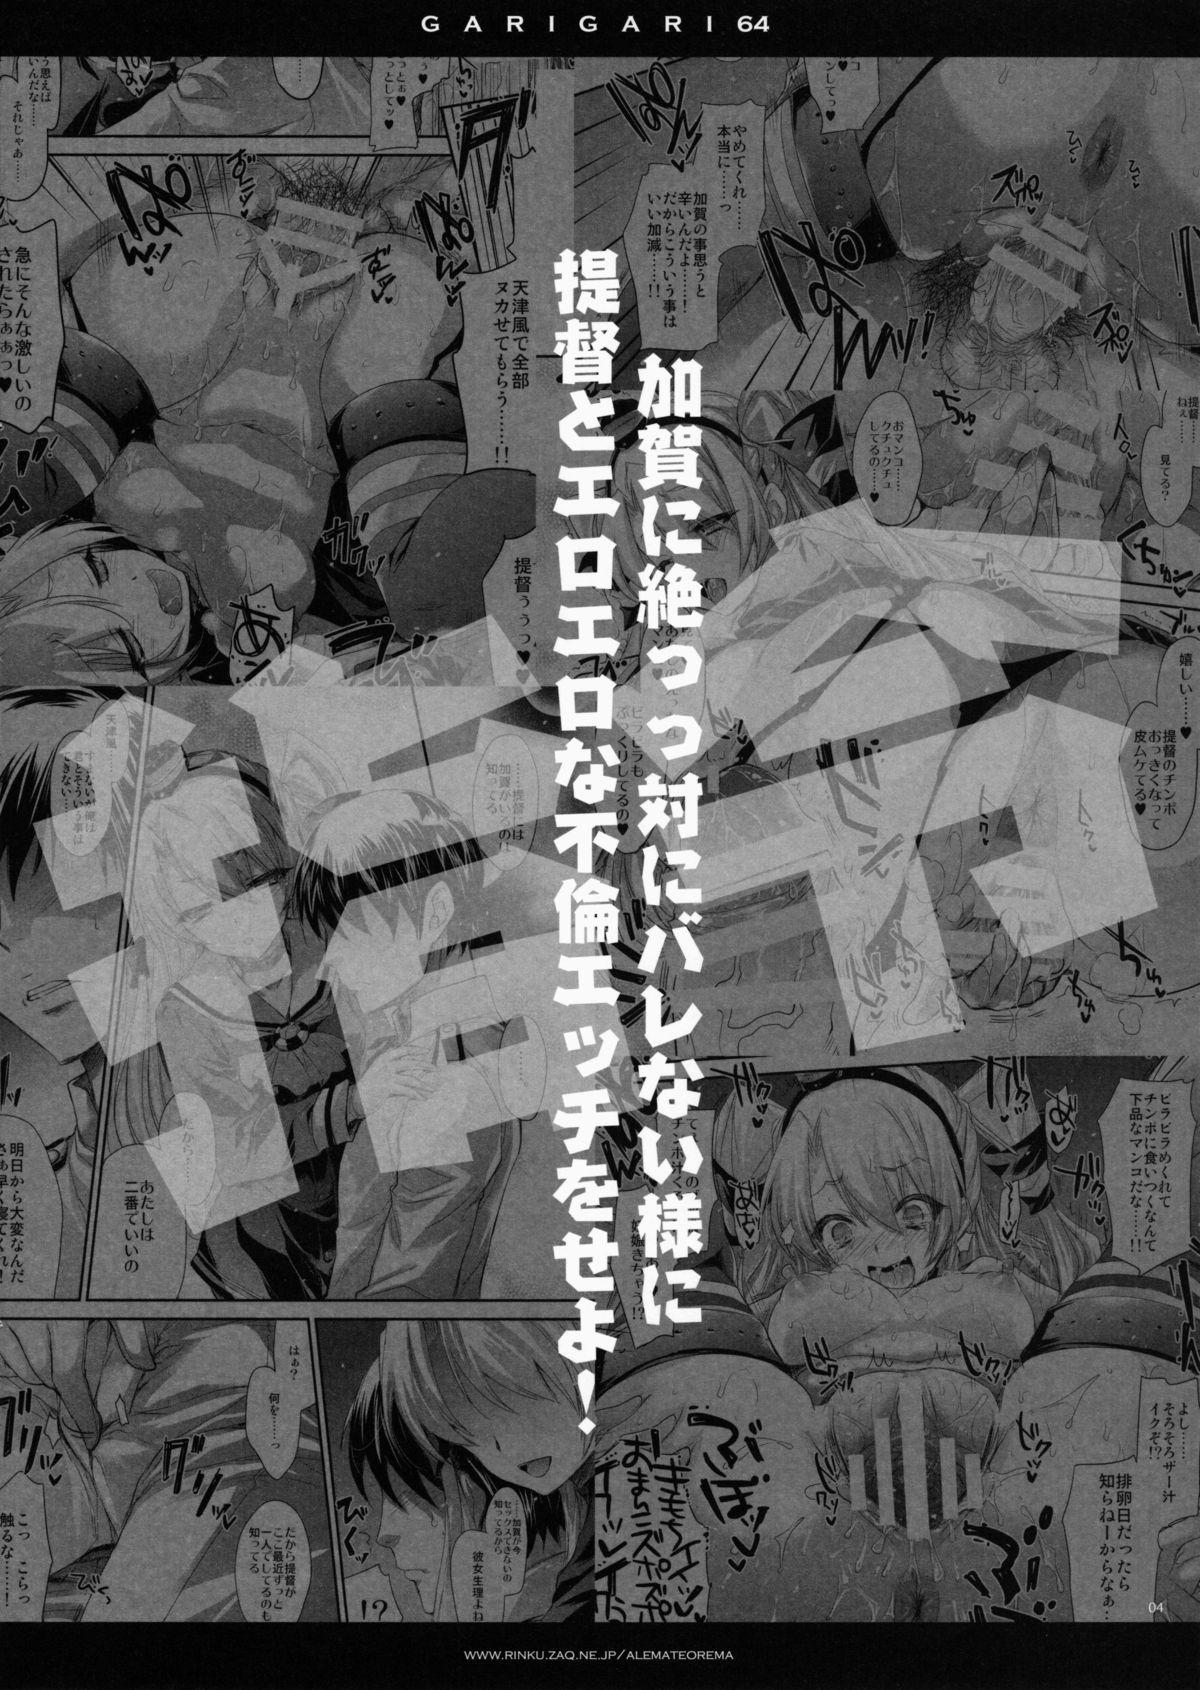 Gaysex GARIGARI 64 - Kantai collection Best Blowjobs Ever - Page 4